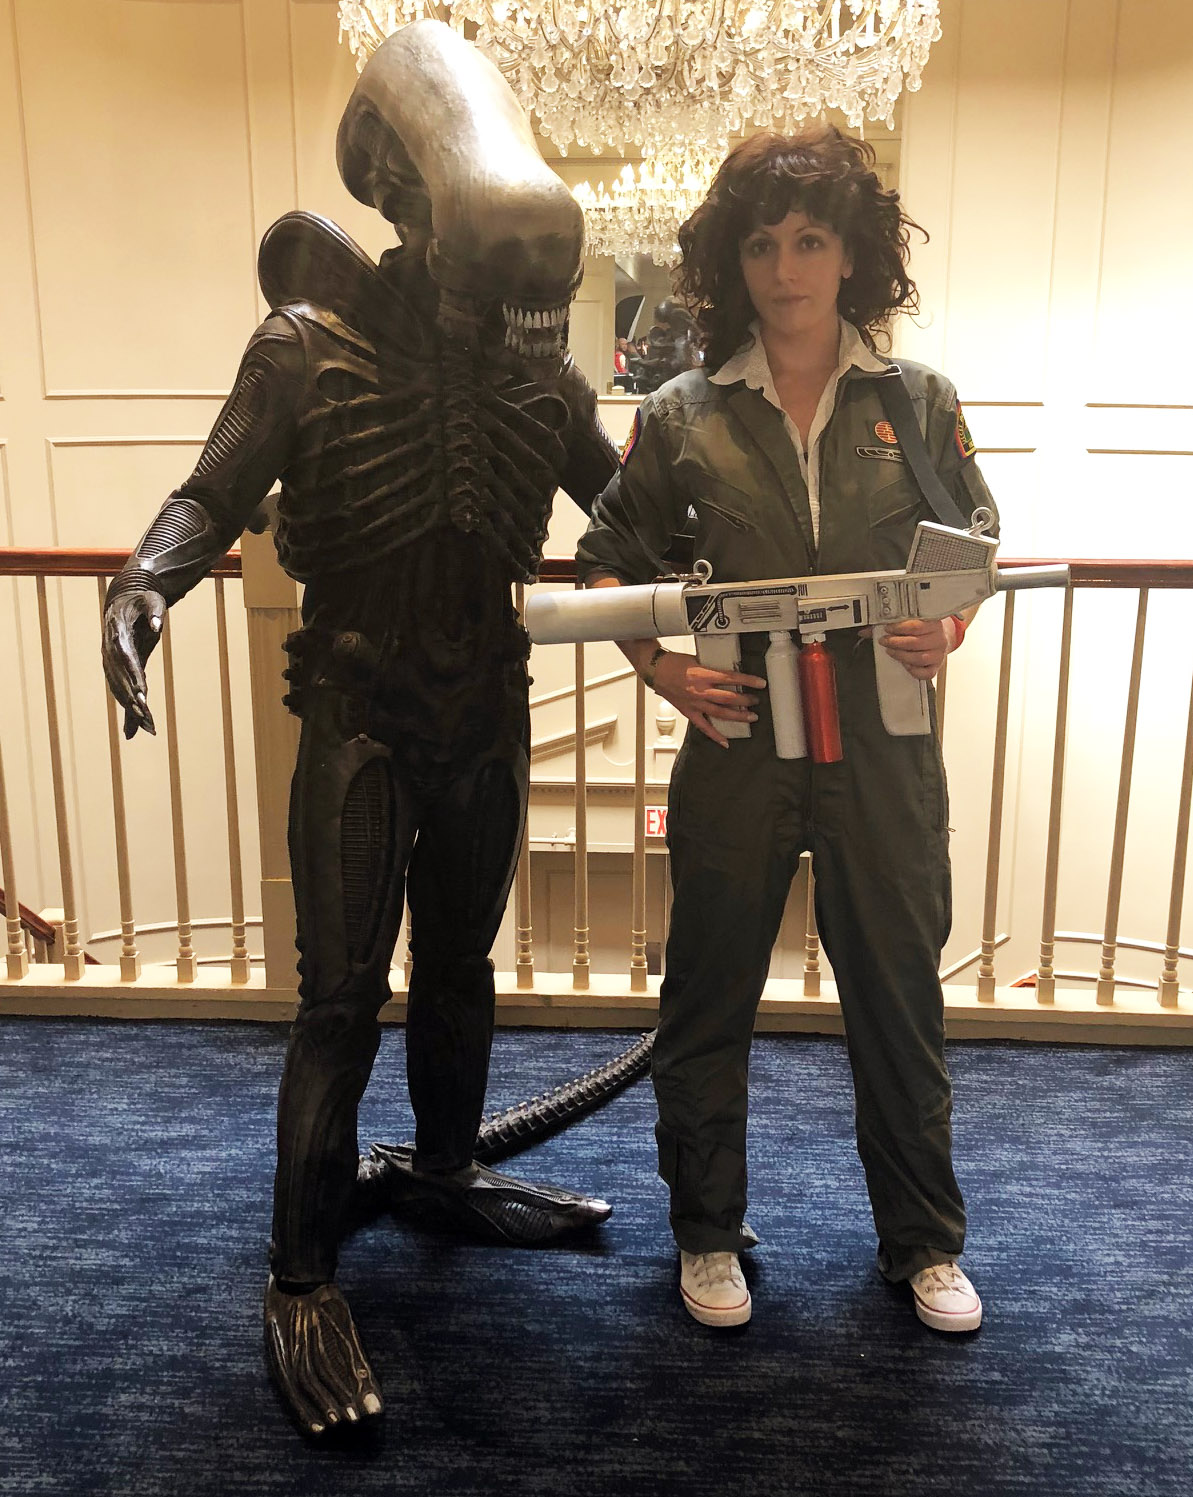 Two people dressed as a xenomorph and Ripley from the movie "Alien"